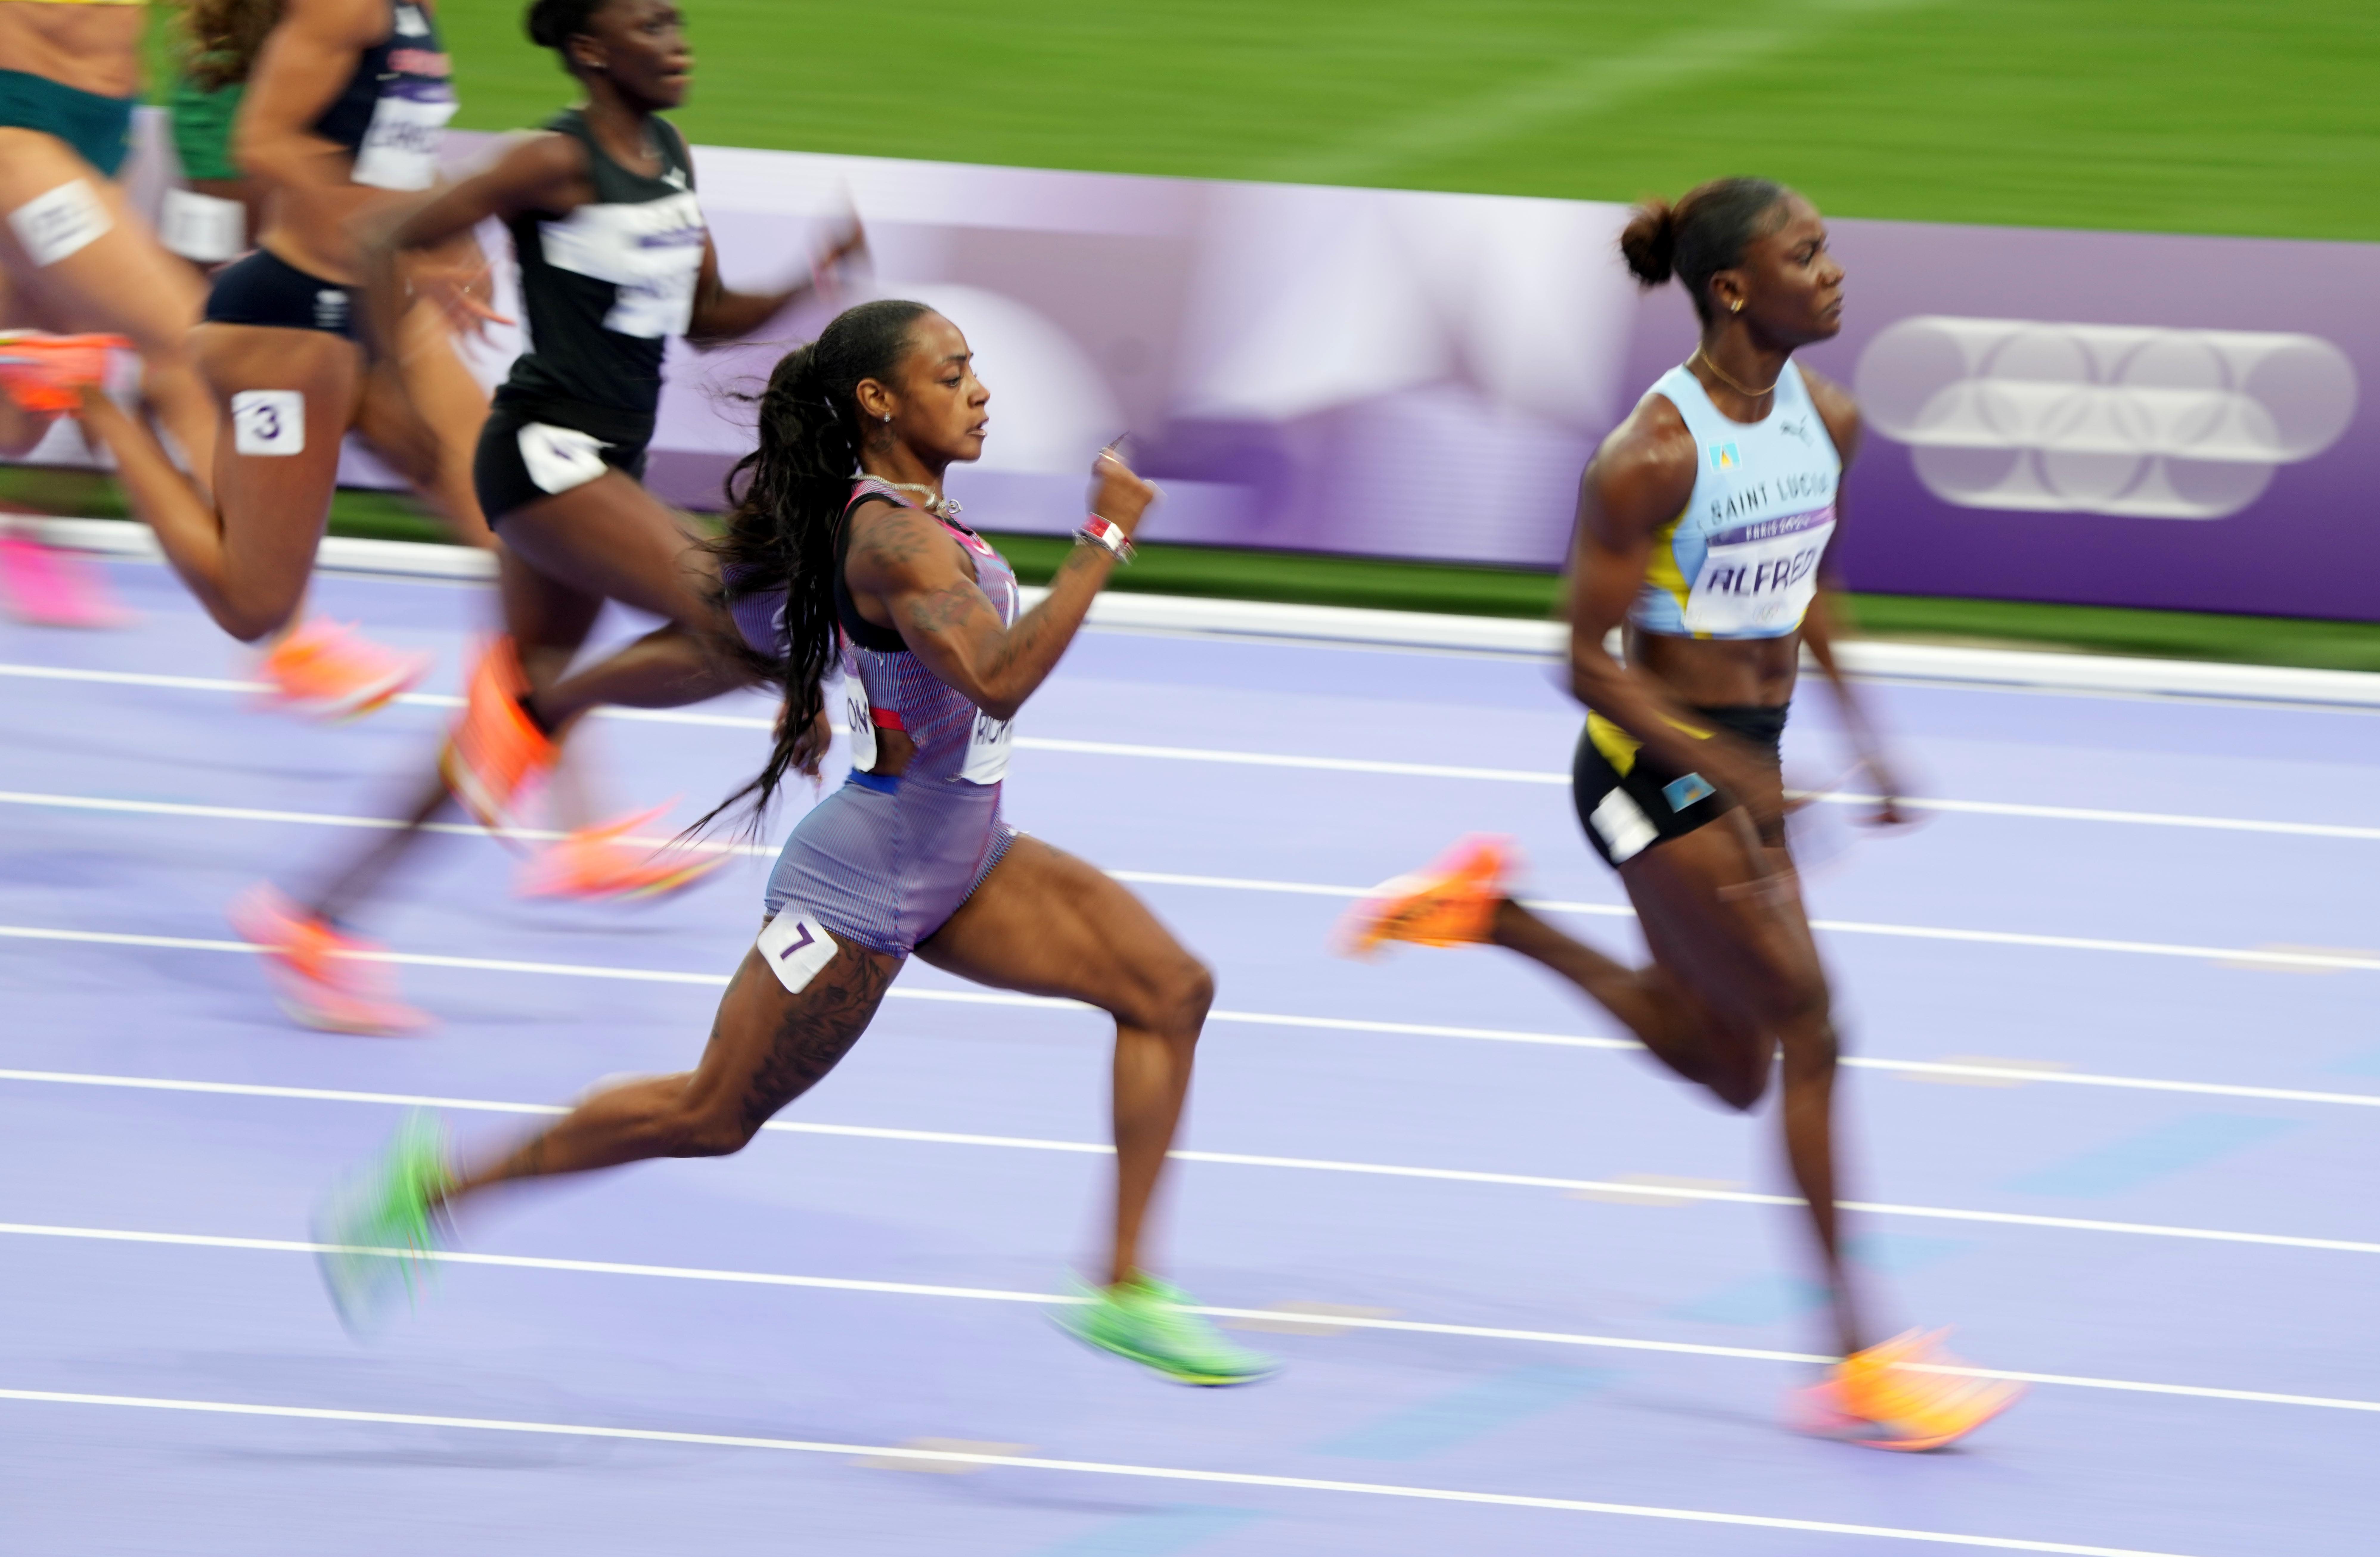 Sha'Carri Richardson silvers in 100m final: Social reactions to star's first Olympic medal